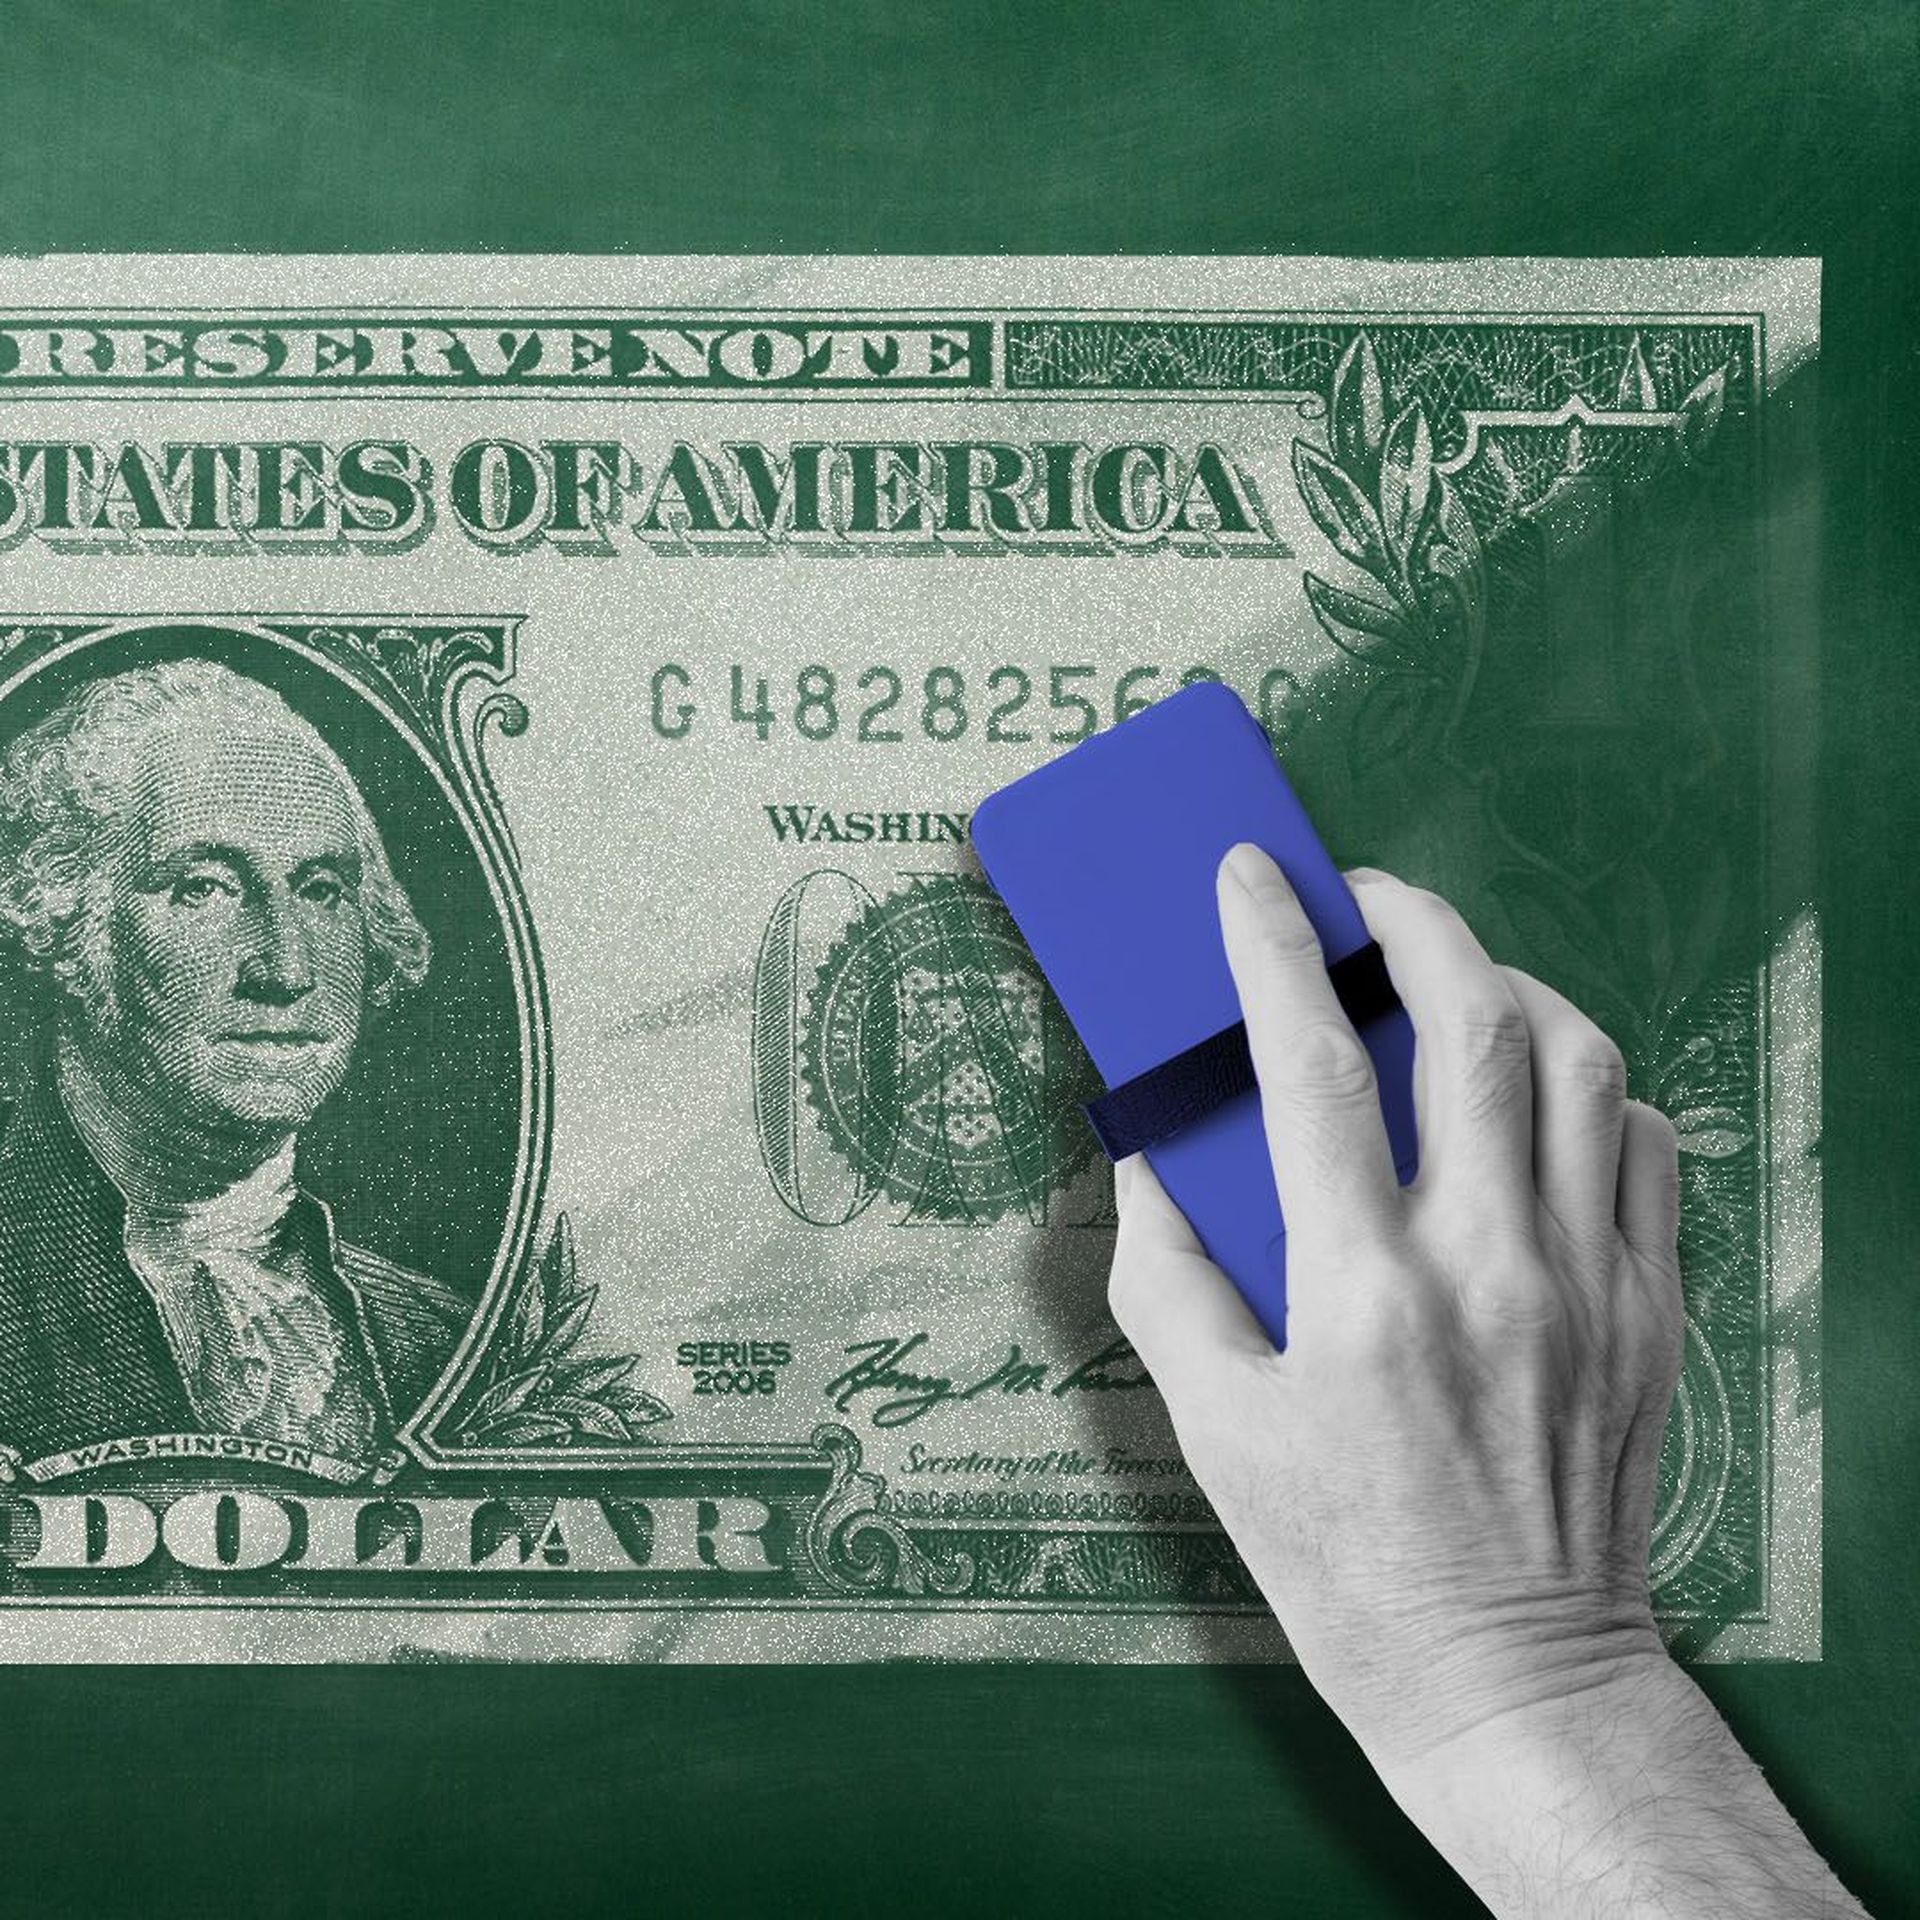 Illustration of a dollar made out of chalk on a chalkboard being erased